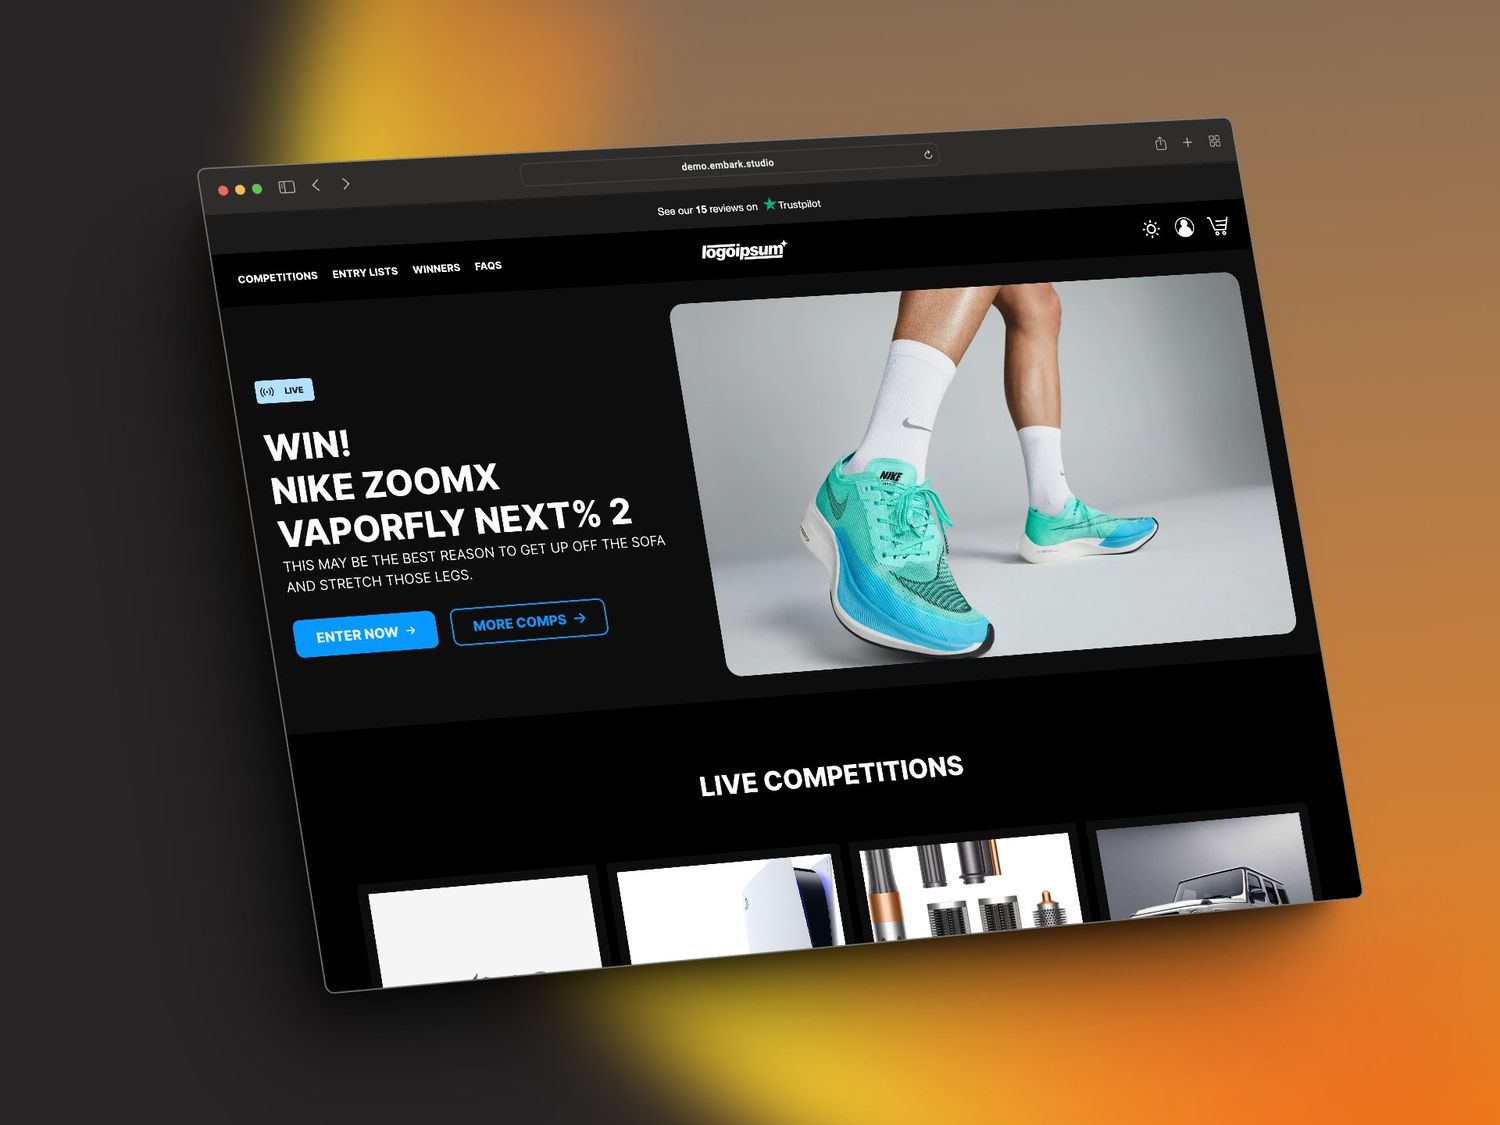 A website displays a competition to win Nike ZoomX Vaporfly Next% 2 shoes. The page features a large image of the shoes and links to enter the competition and view more competitions.